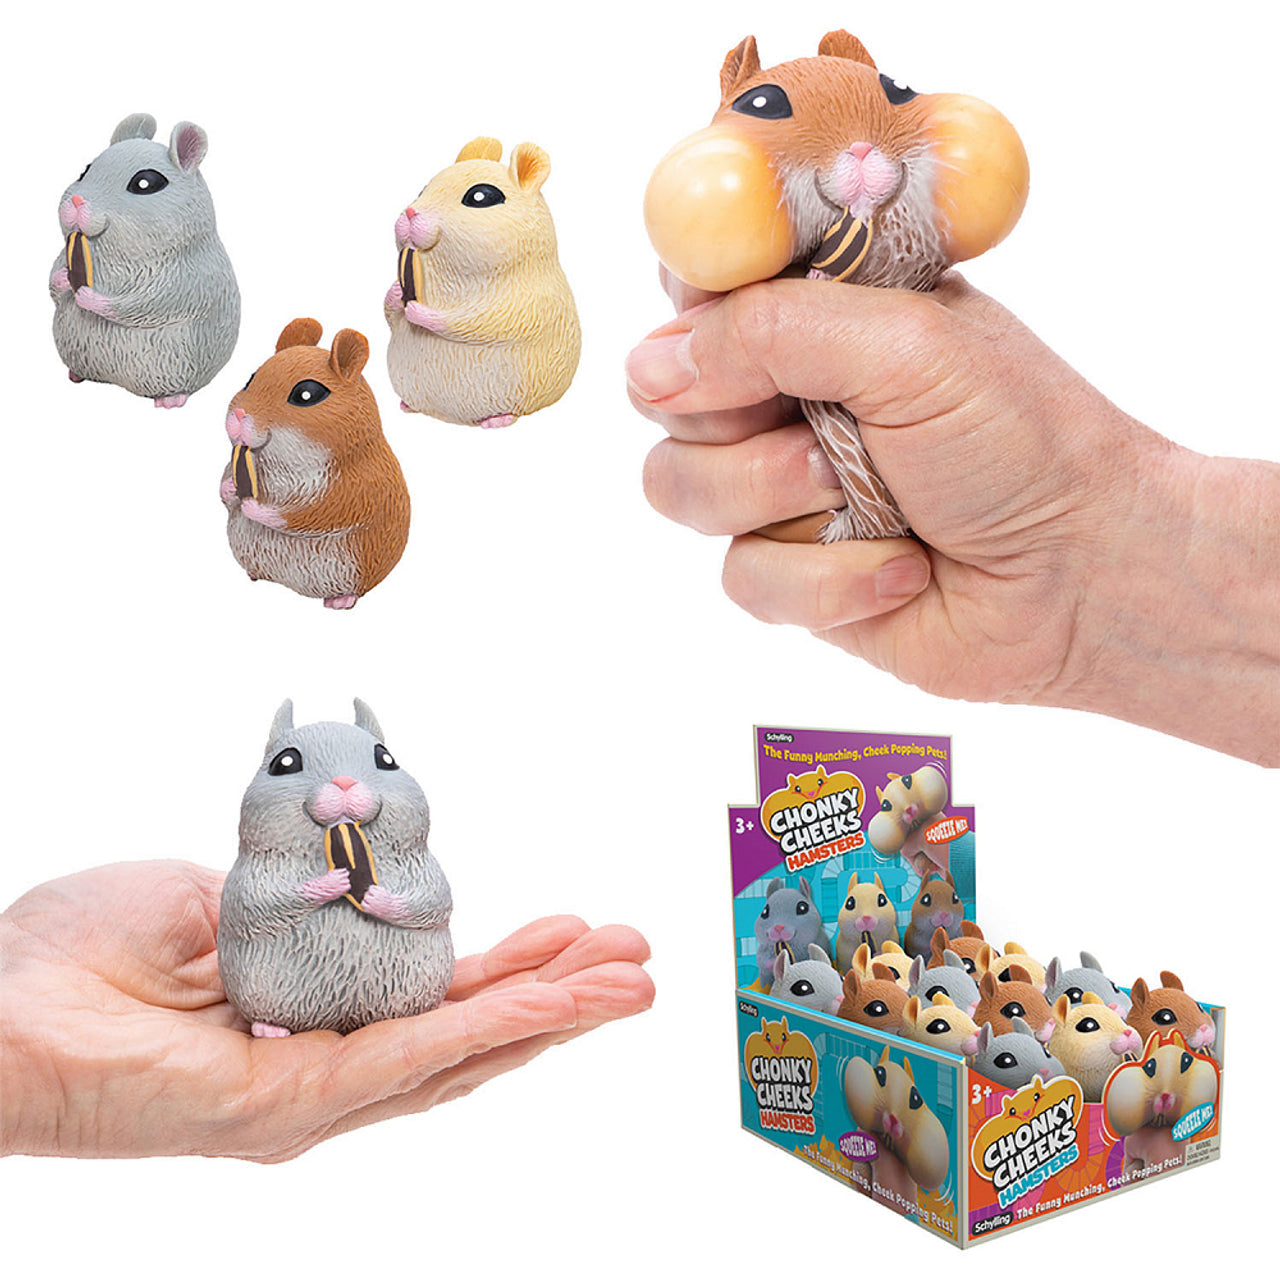 Schylling Chonky Cheeks Hamsters – Mother Earth Baby/Curious Kidz Toys